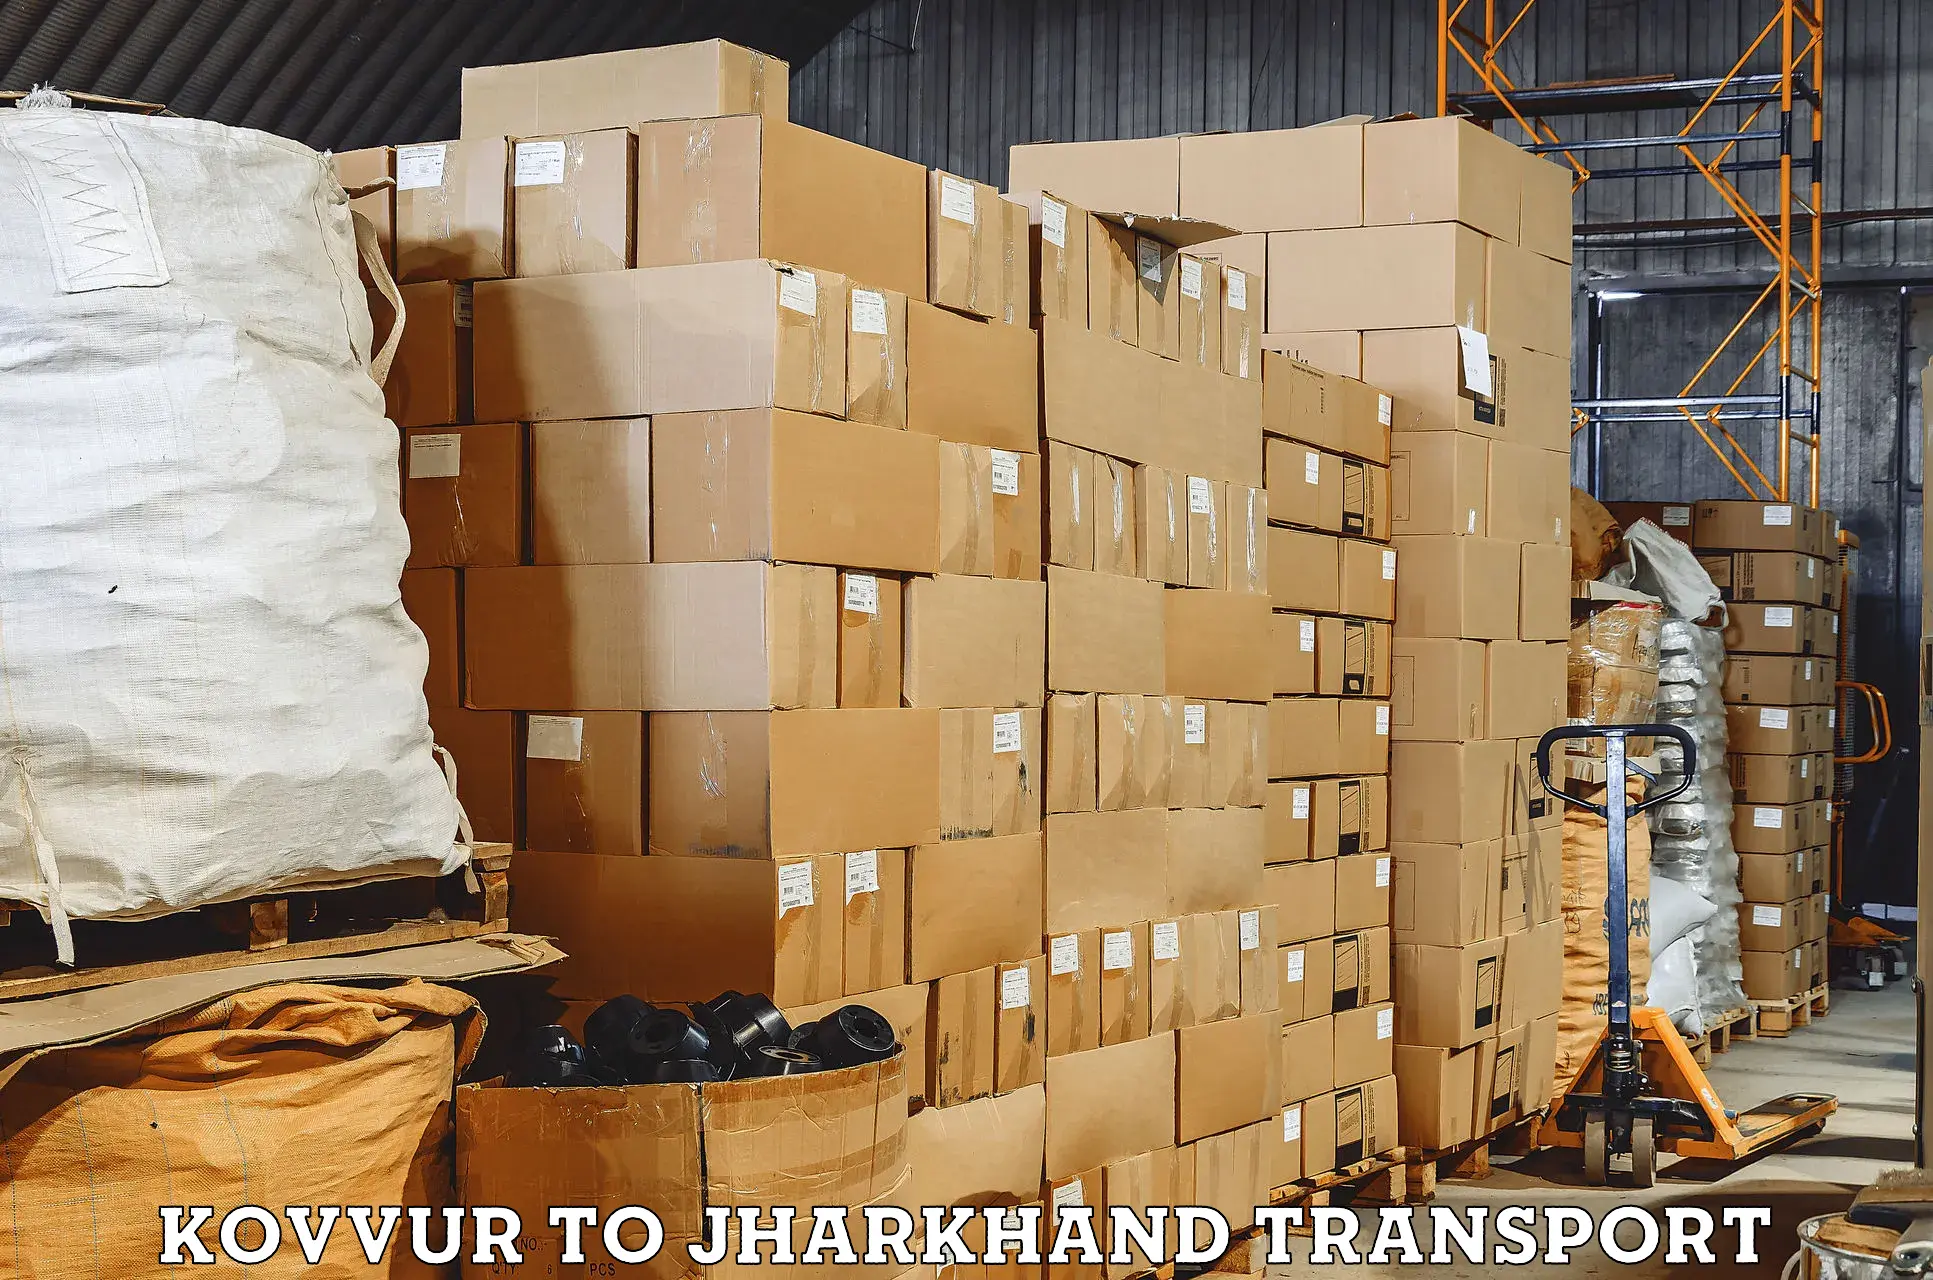 Air freight transport services in Kovvur to Poreyahat